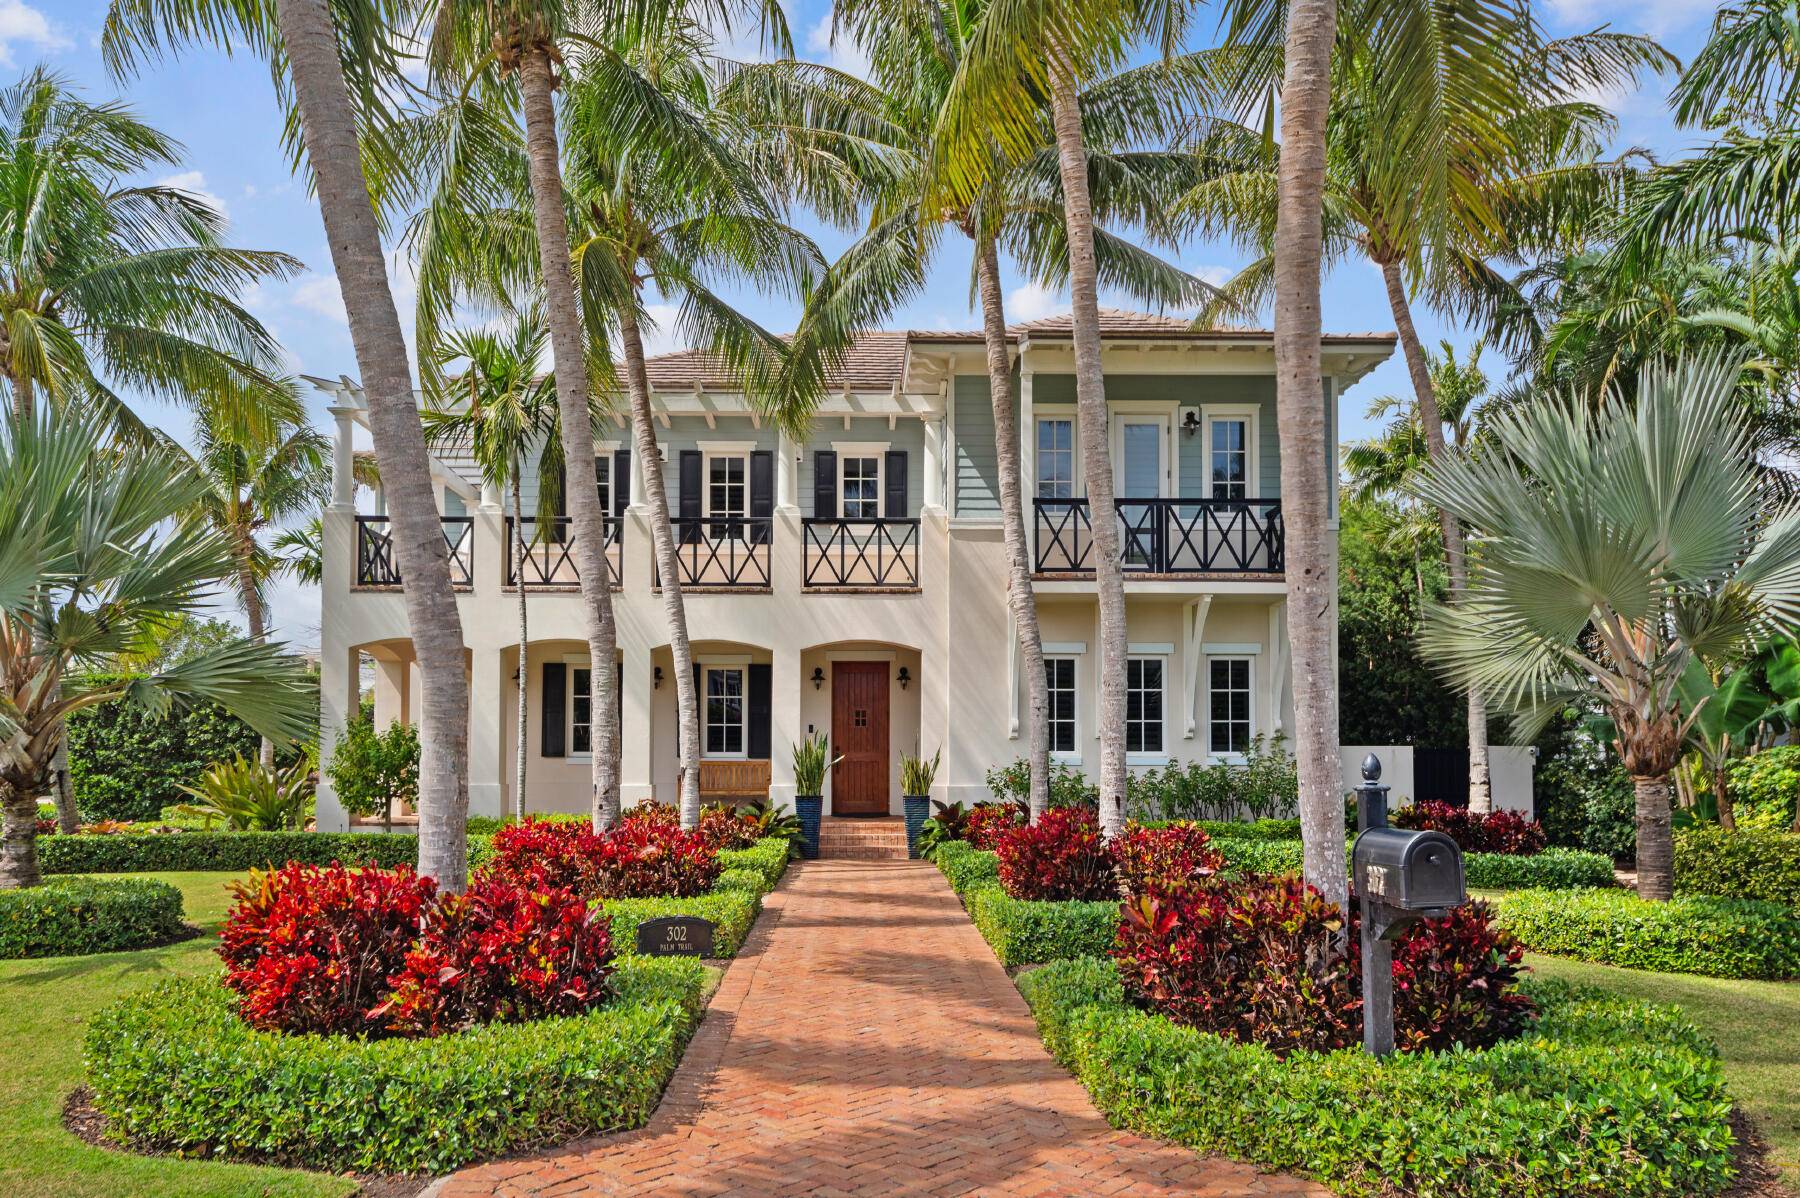 Nestled on the highly sought after Palm Trail in Delray Beach,, this British West Indies inspired gem seamlessly combines luxury and comfort with timeless appeal.